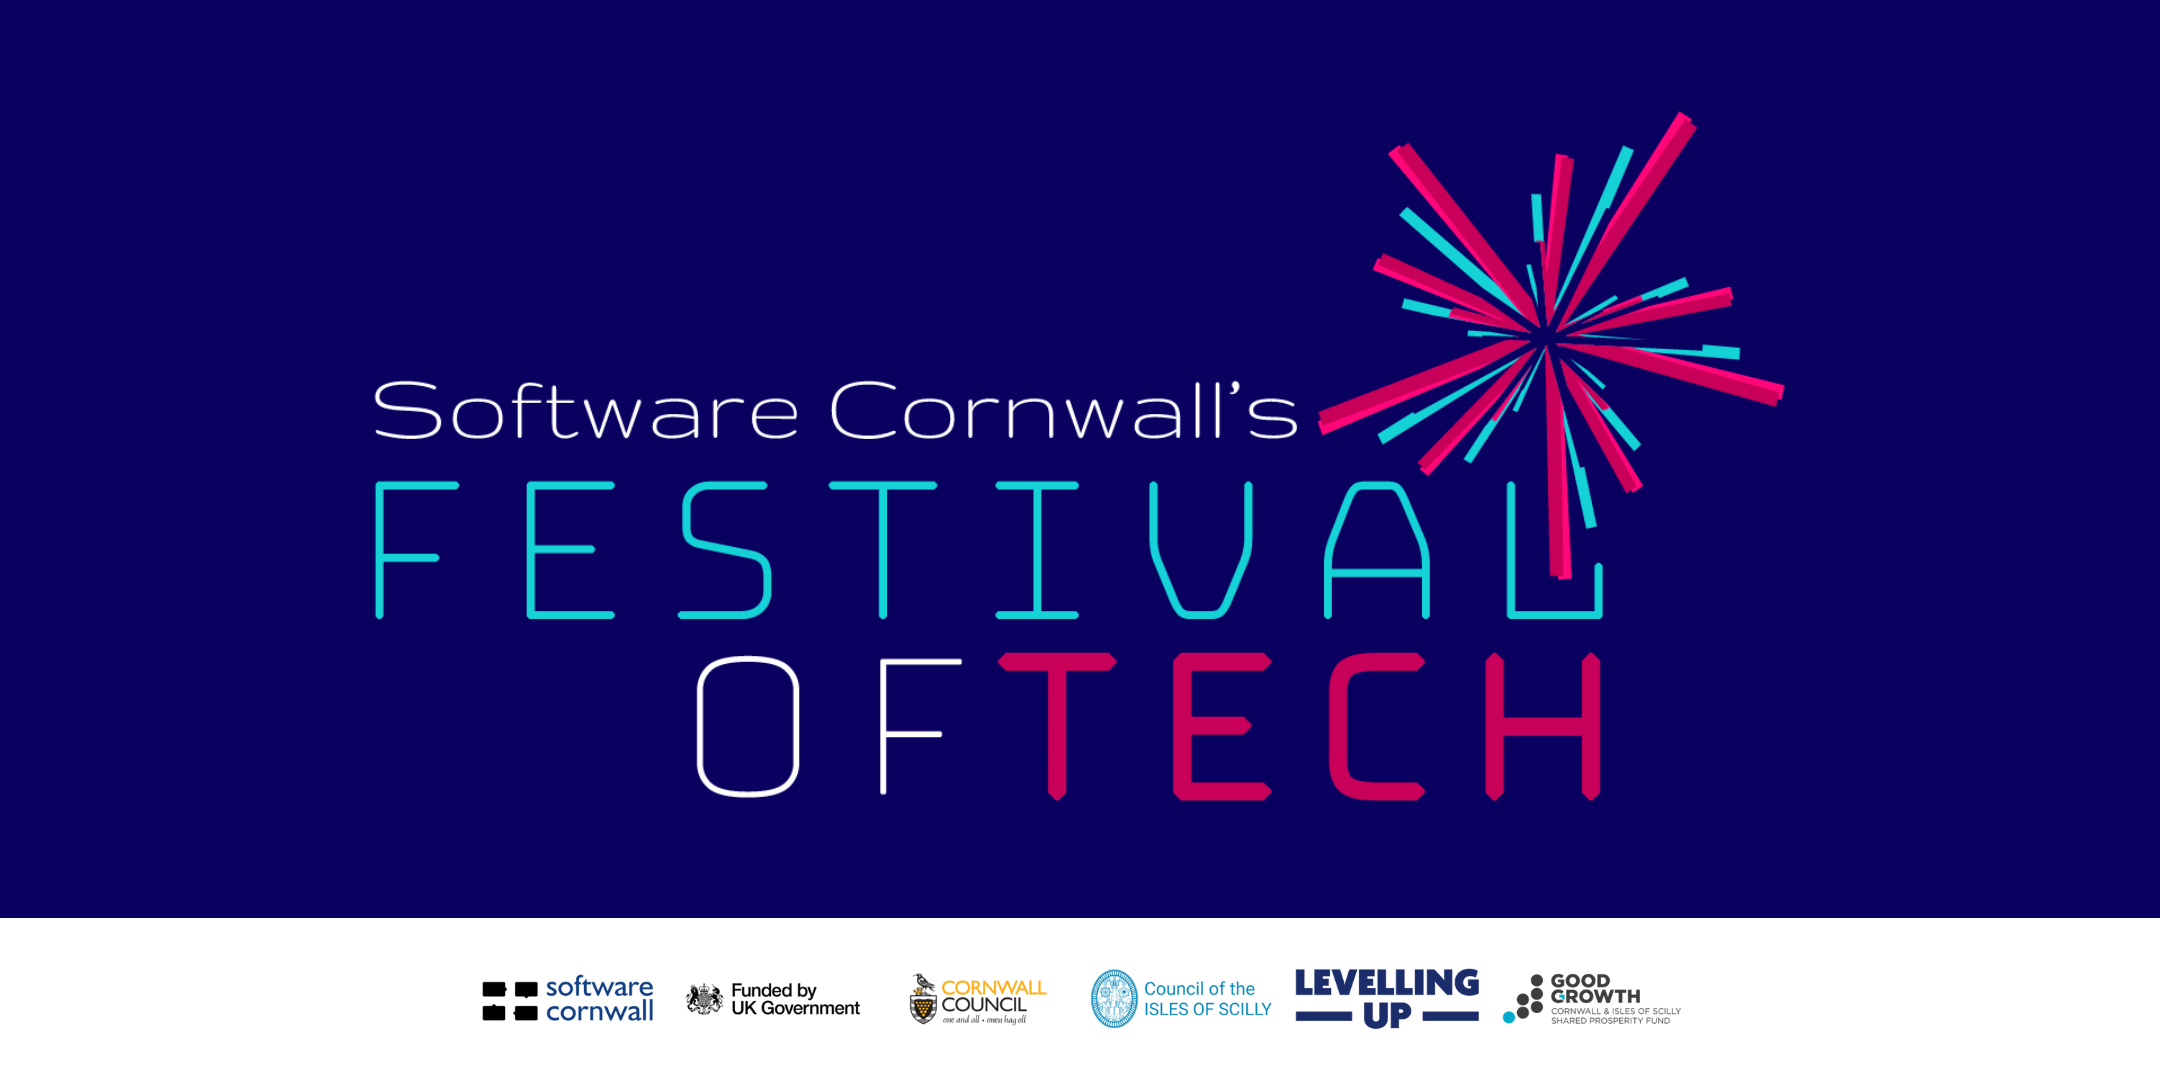 Software Cornwall's Festival of Tech